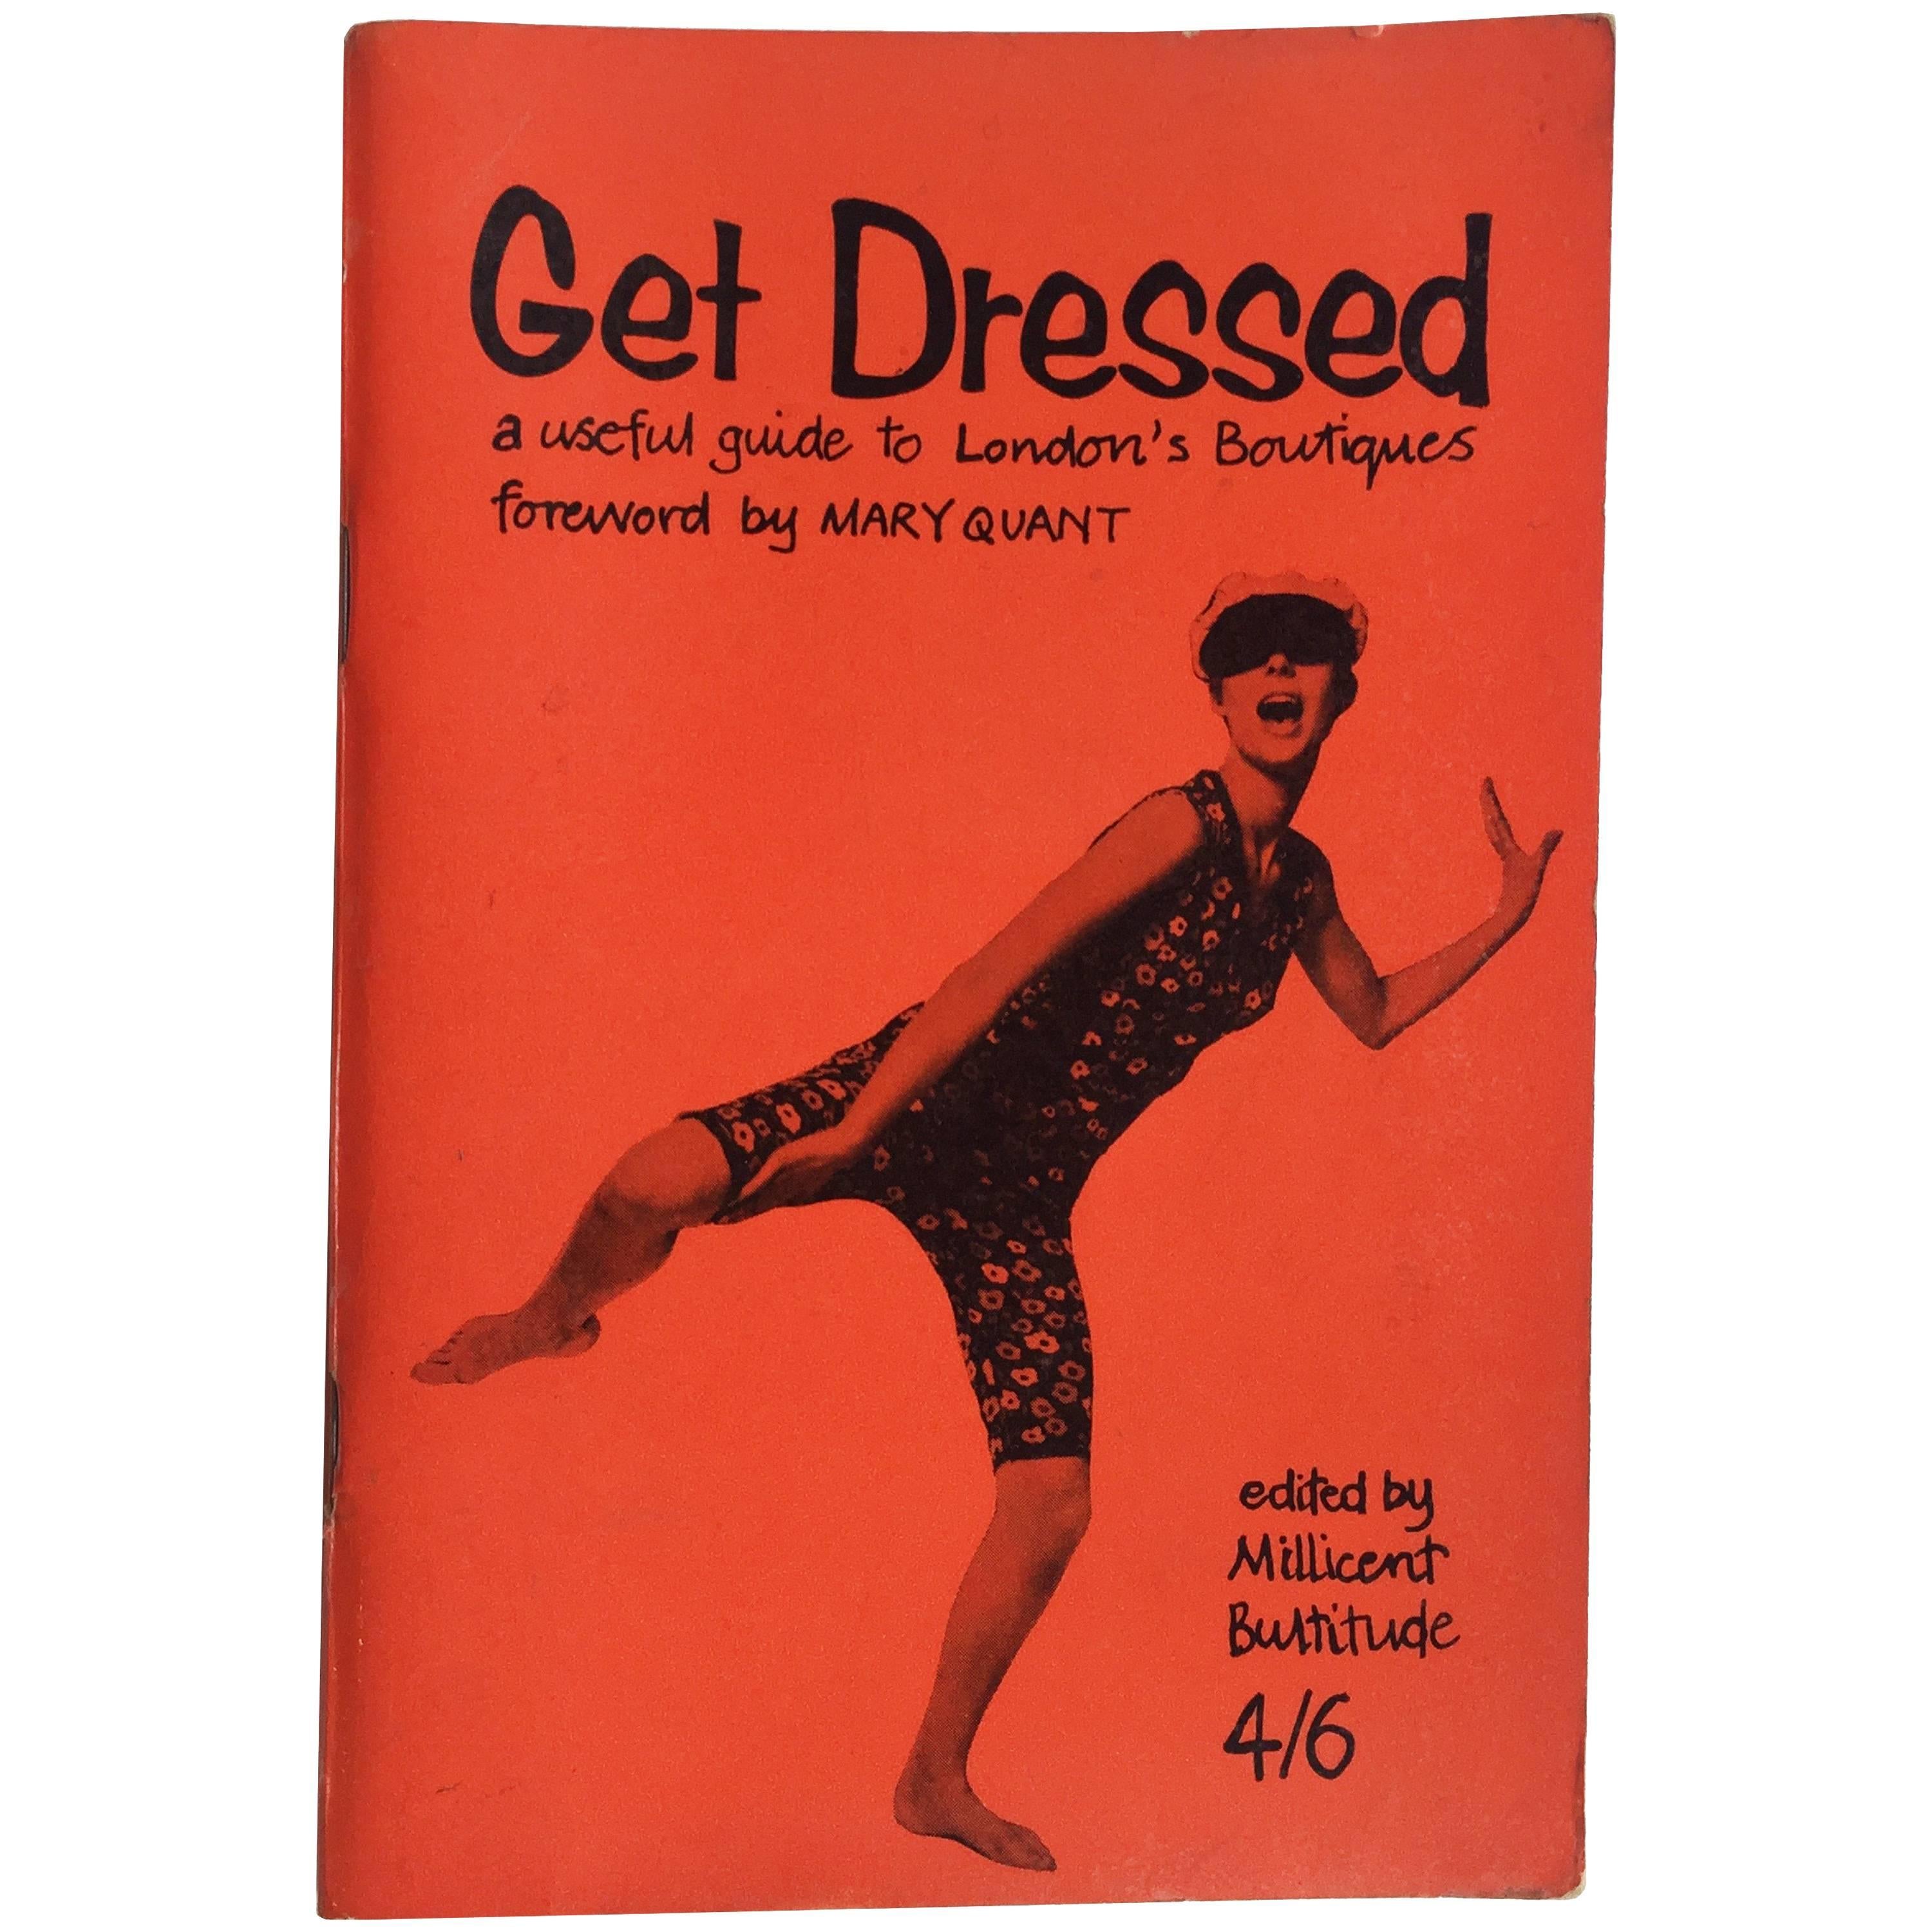 Get Dressed: A Useful Guide to London's Boutiques - Mary Quant 1966